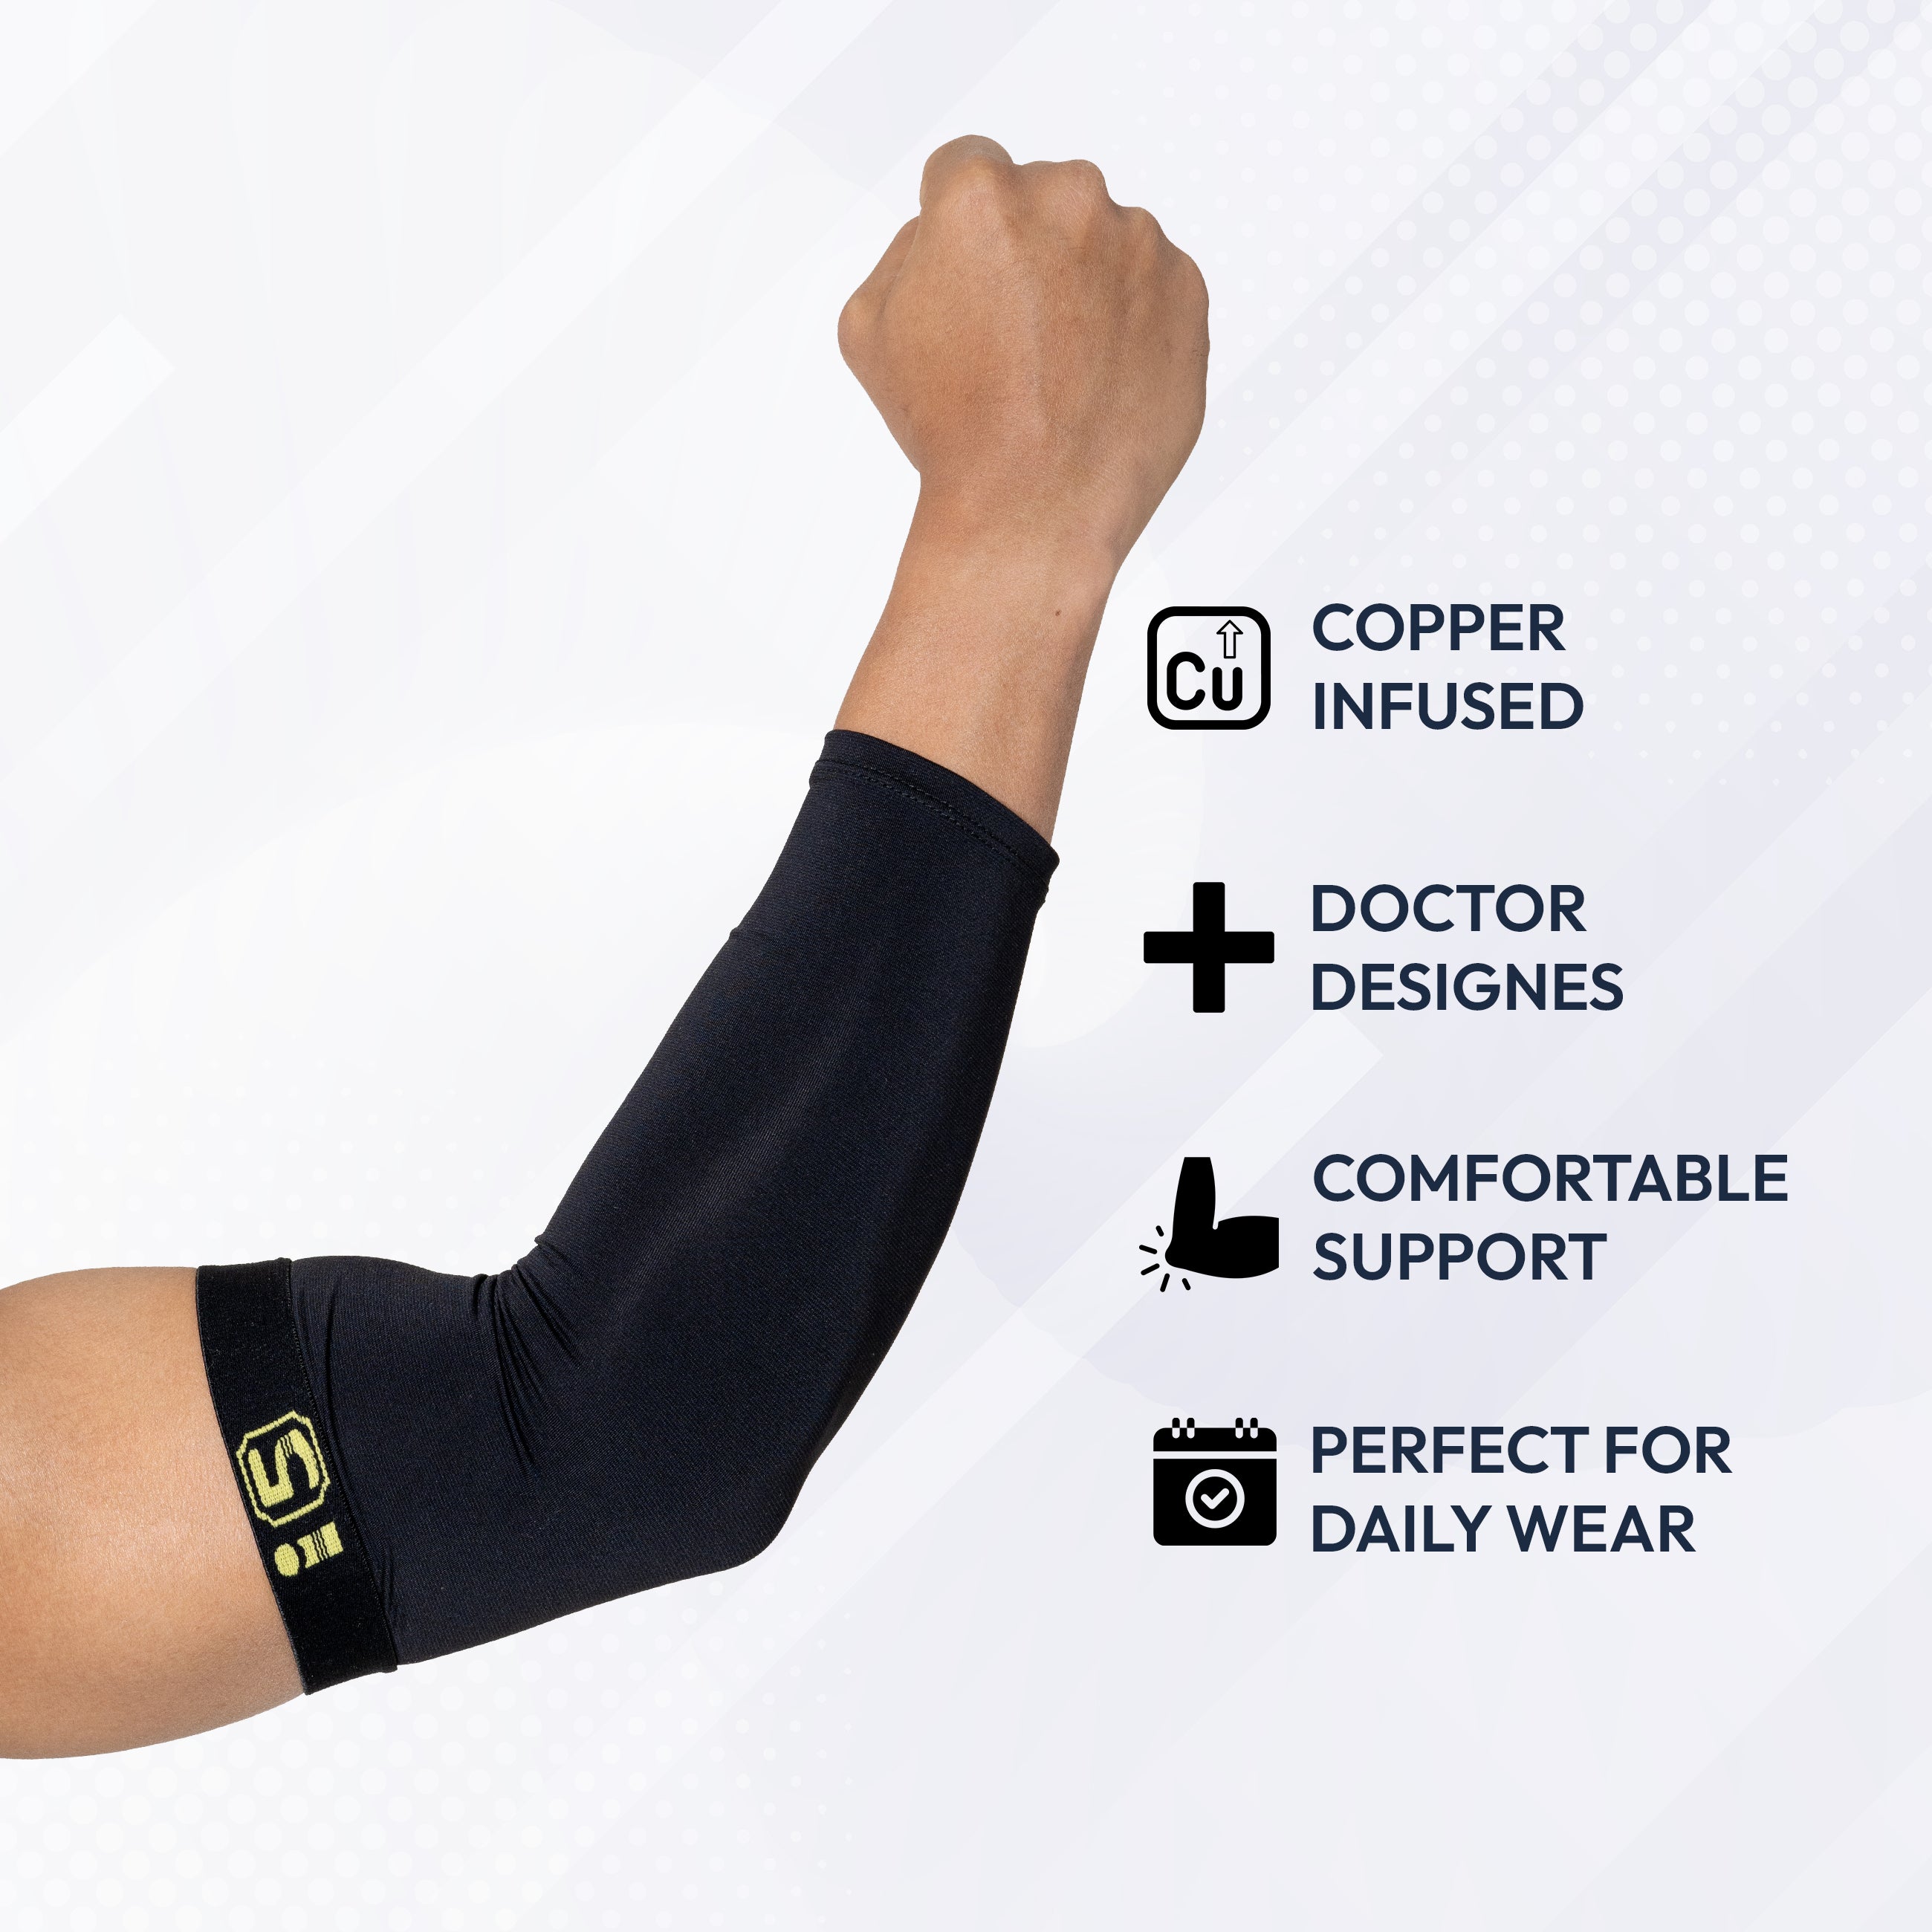 I5Joints-Cooper Compression Elbow Support(I5Joints Elbow Compression Cap For Men & Women|Workout, Gym, Pain Relief, Quick Recovery, Tennis, Golf, Gym Fitness, Volleyball, Cricket| Prevent Injuries|Single Pair))